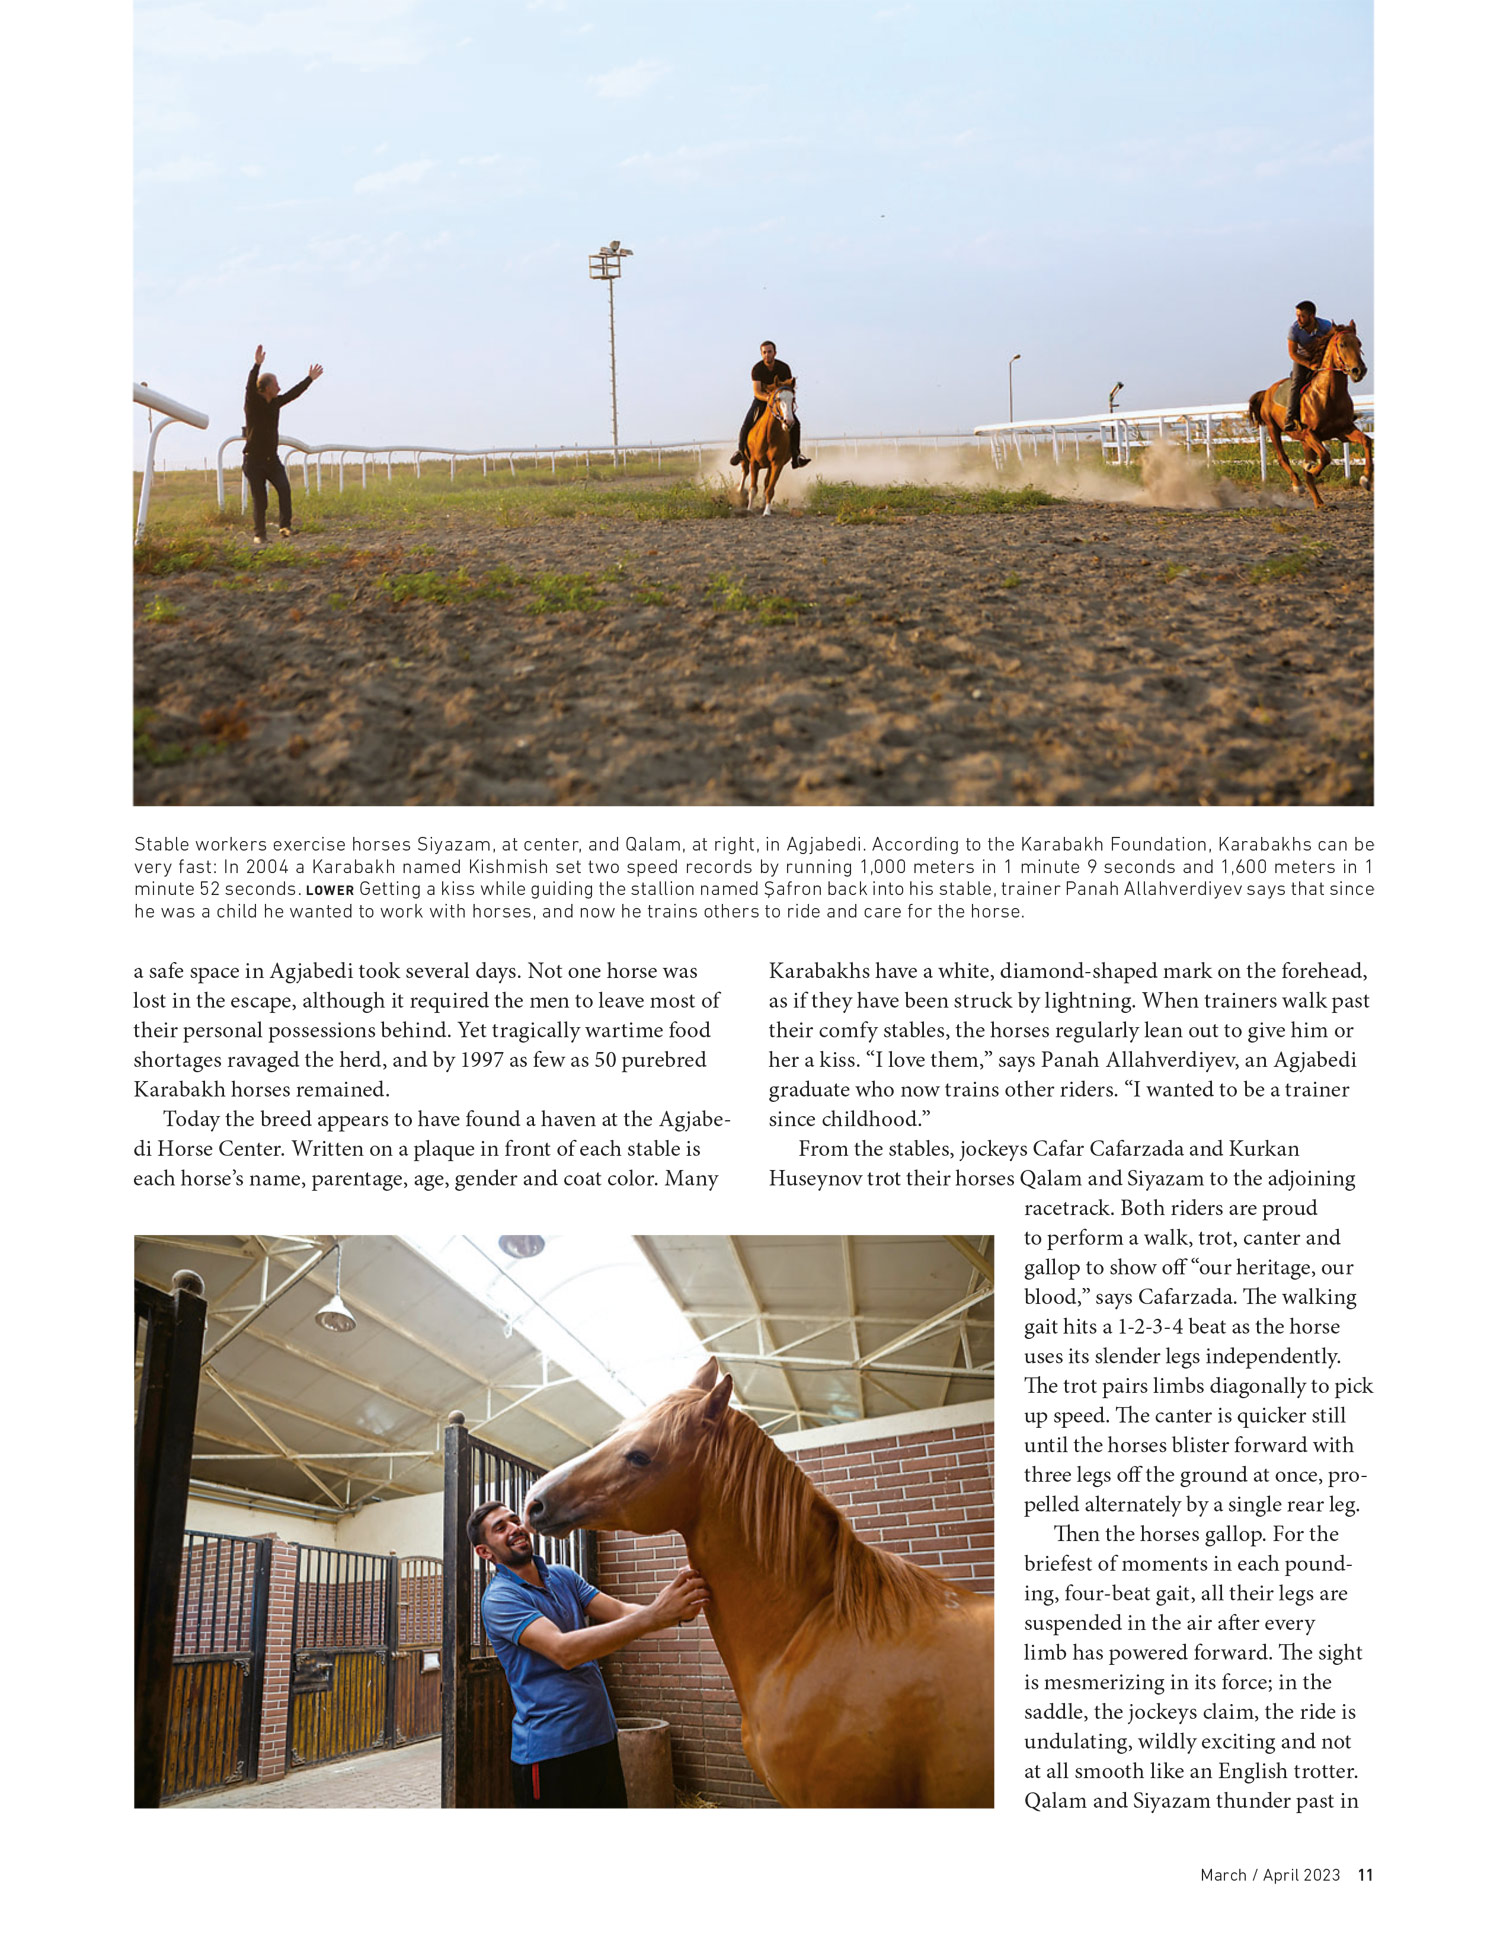 Page of a magazine, showing two photographs of horses, on a racetrack and in a stable